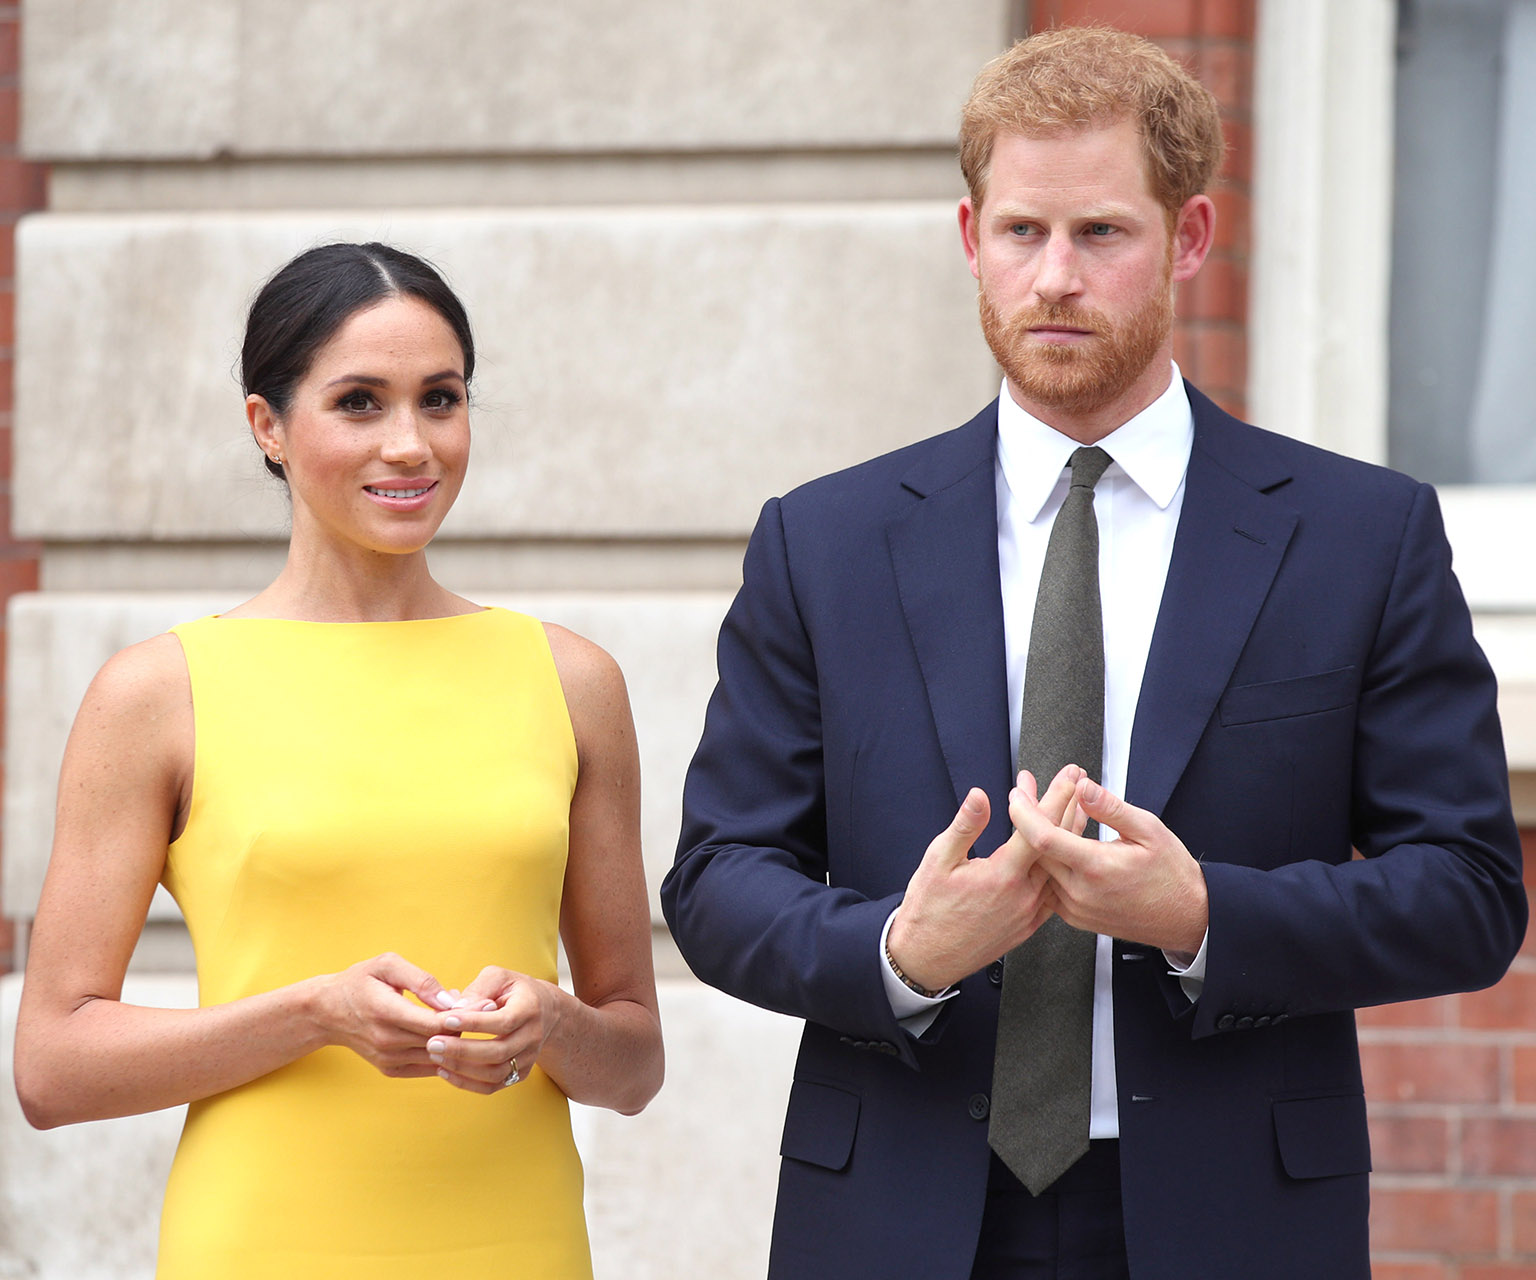 Thomas Markle claims he hung up on Prince Harry in a heated argument before the royal wedding